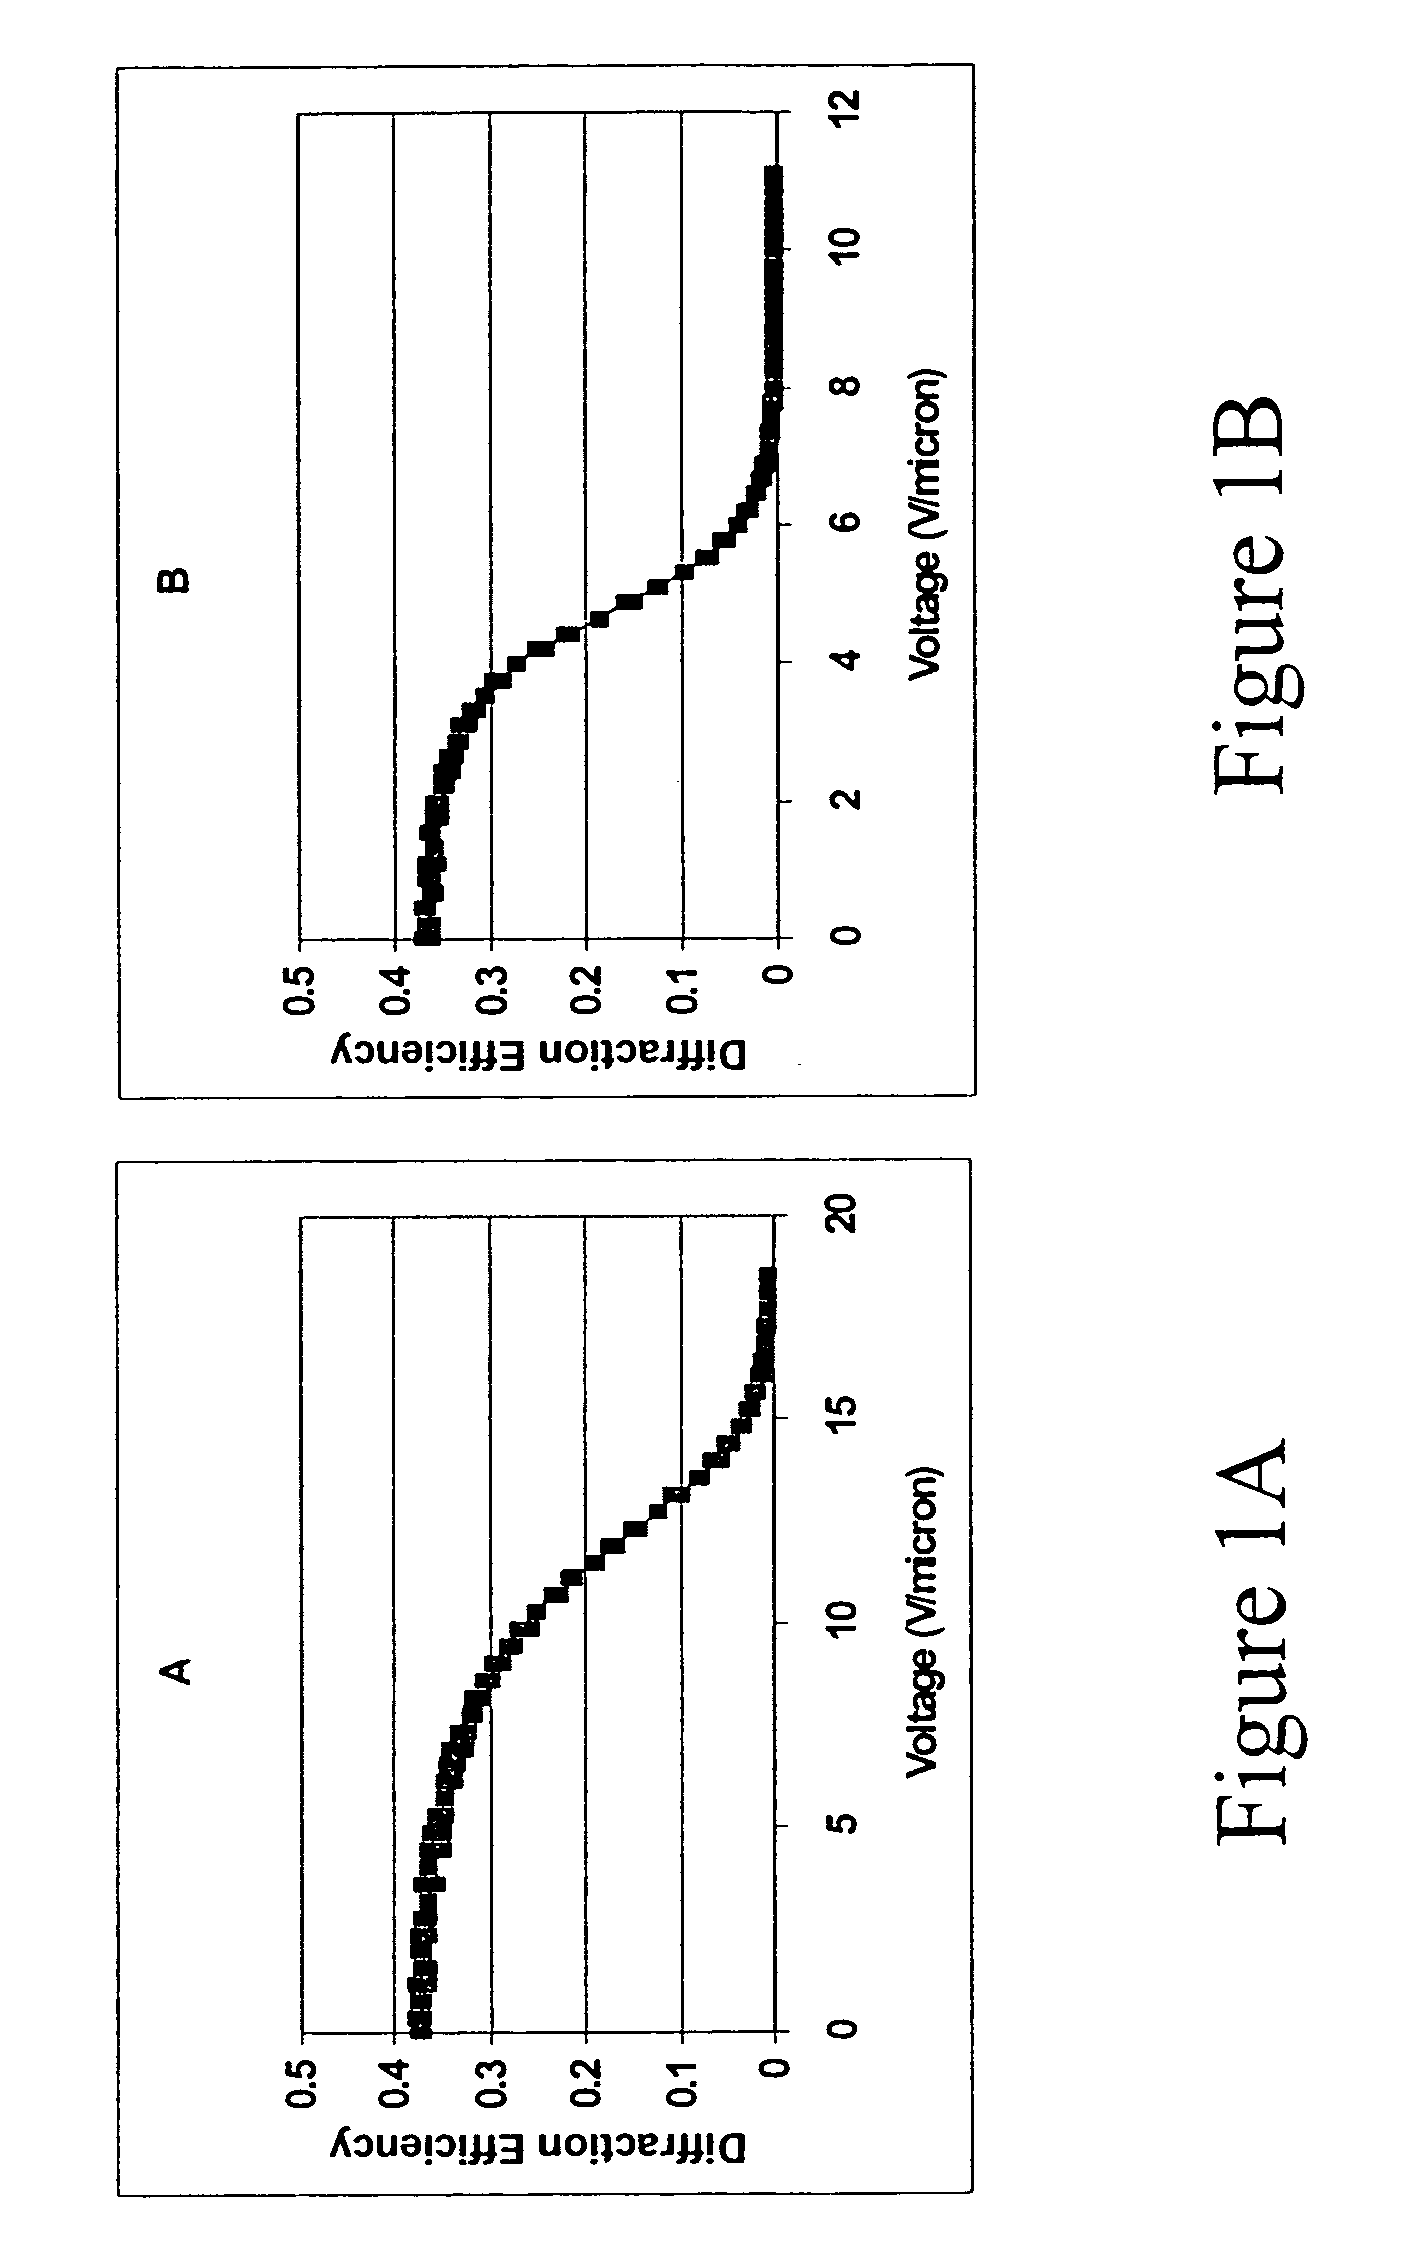 Tailoring material composition for optimization of application-specific switchable holograms